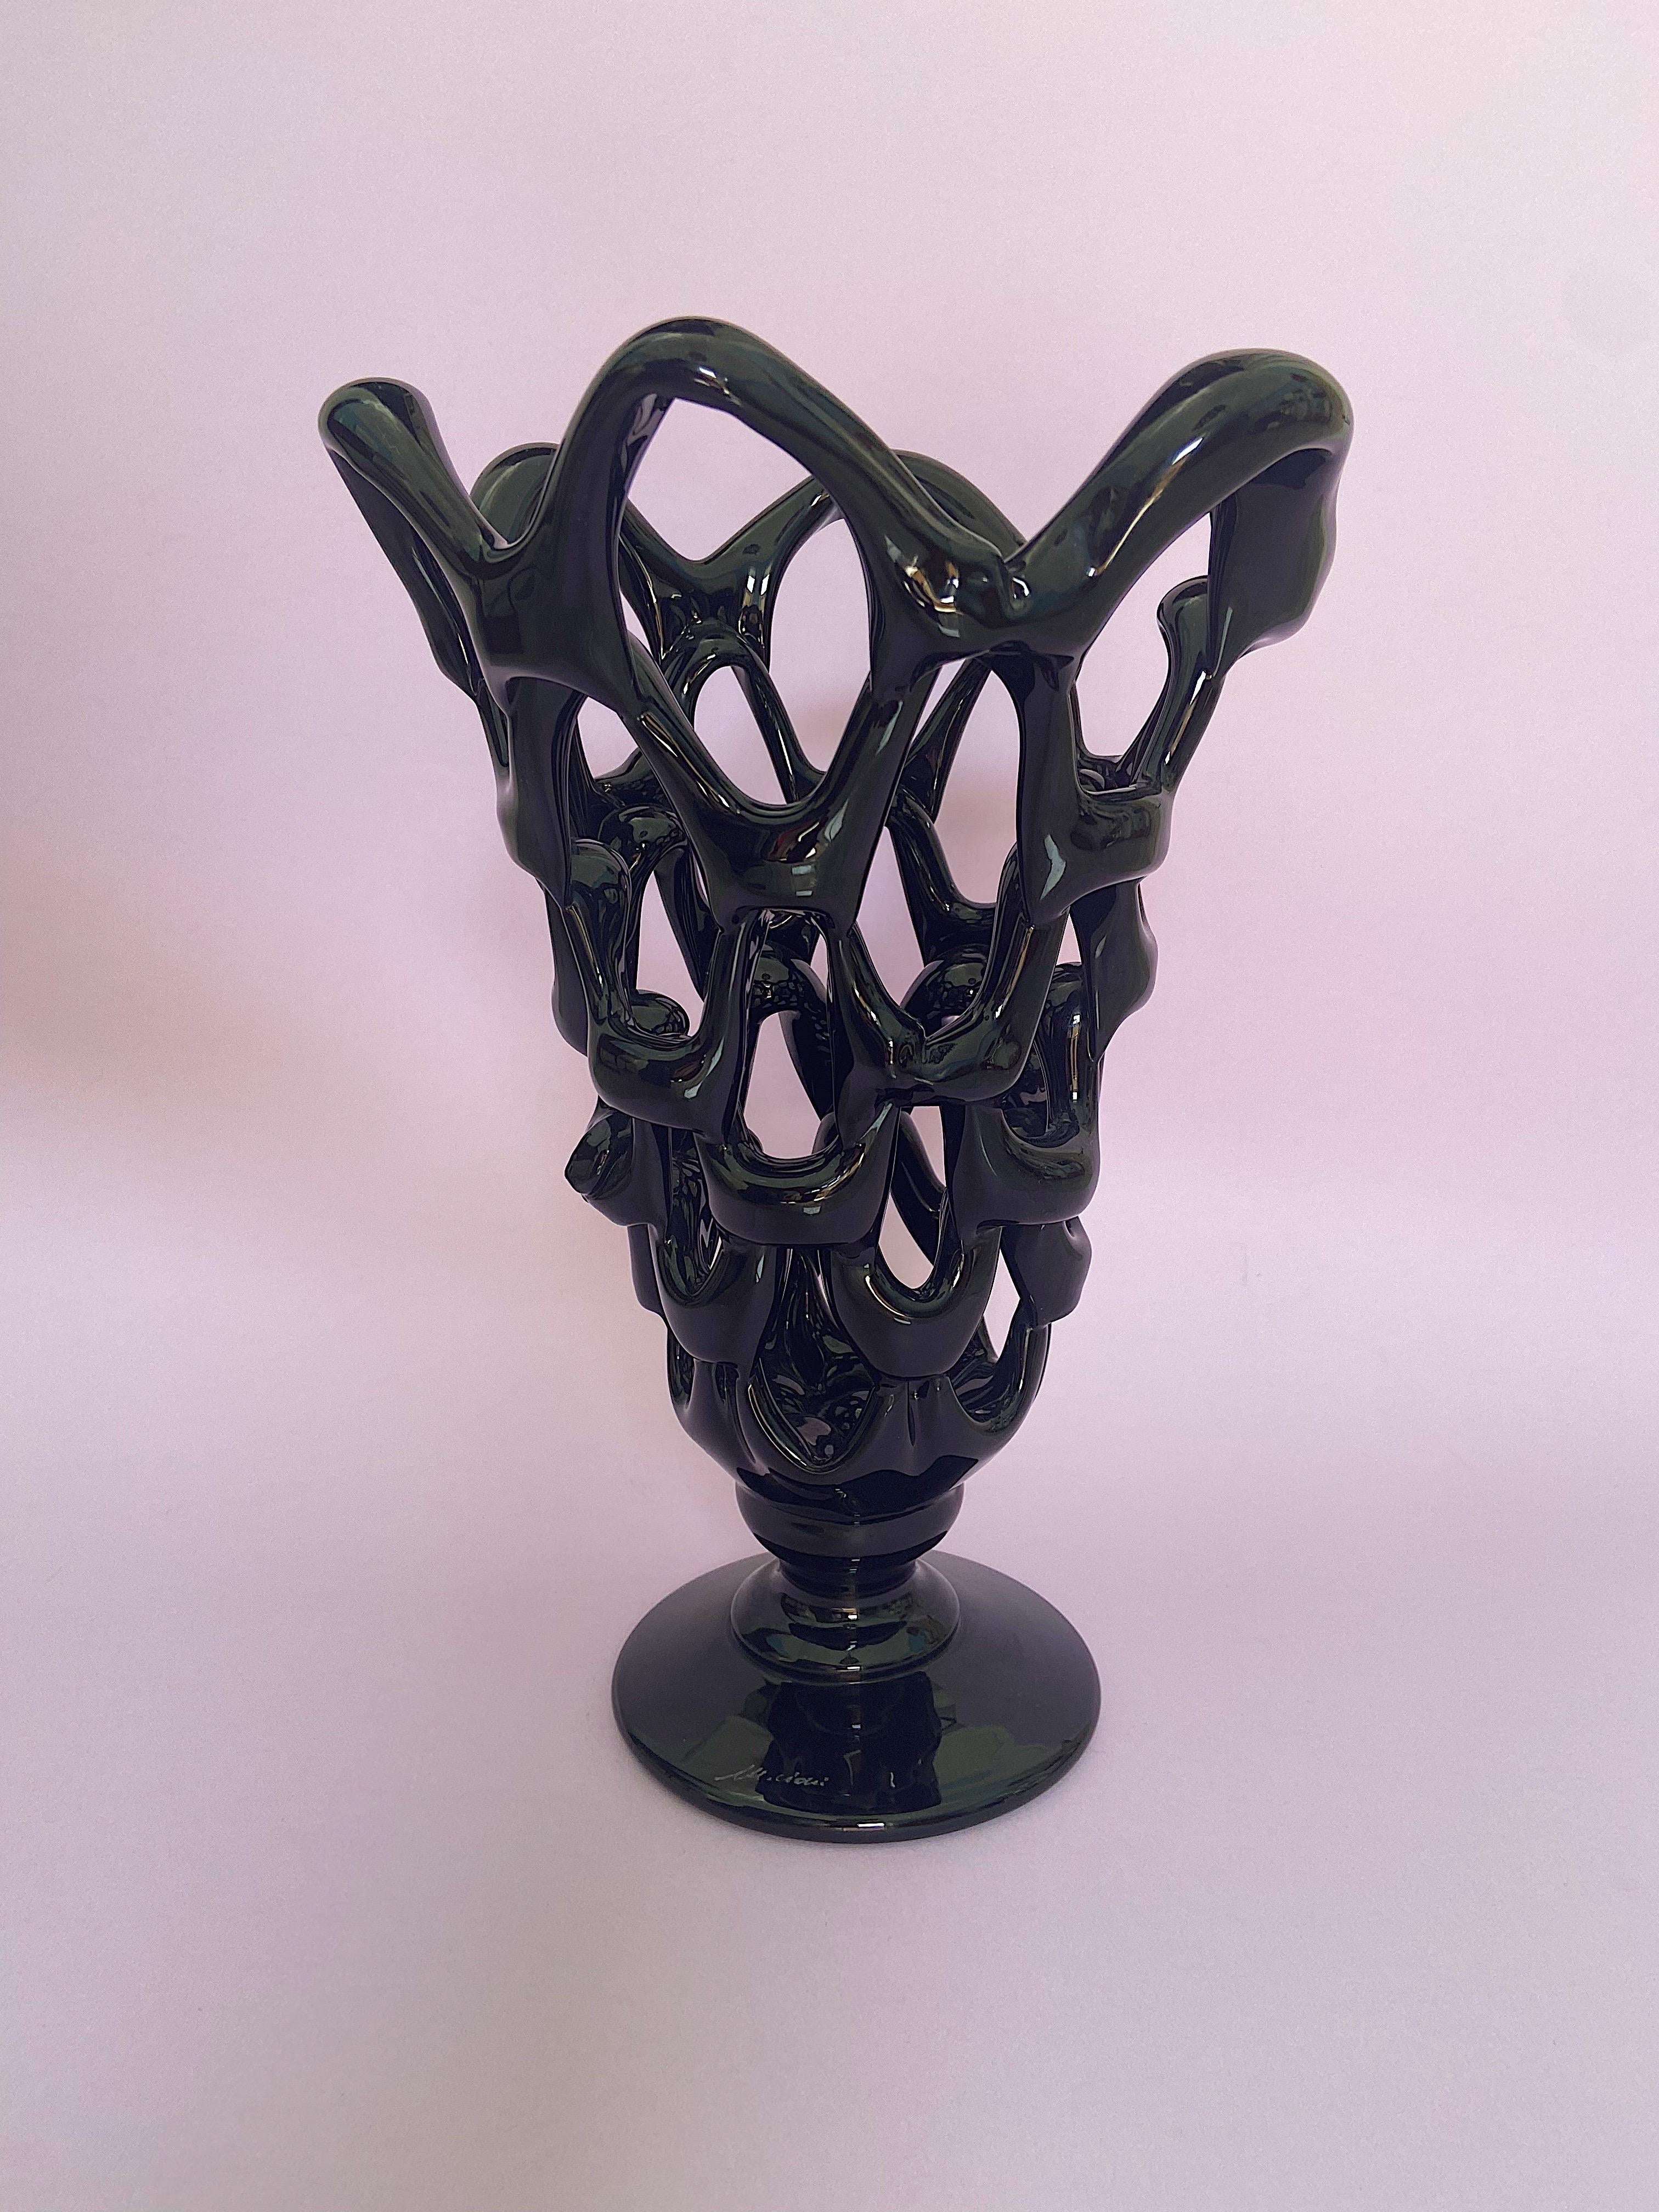 Crystal Glass Vase Sculpture by Mario Cioni & C In Good Condition For Sale In Palermo, PA